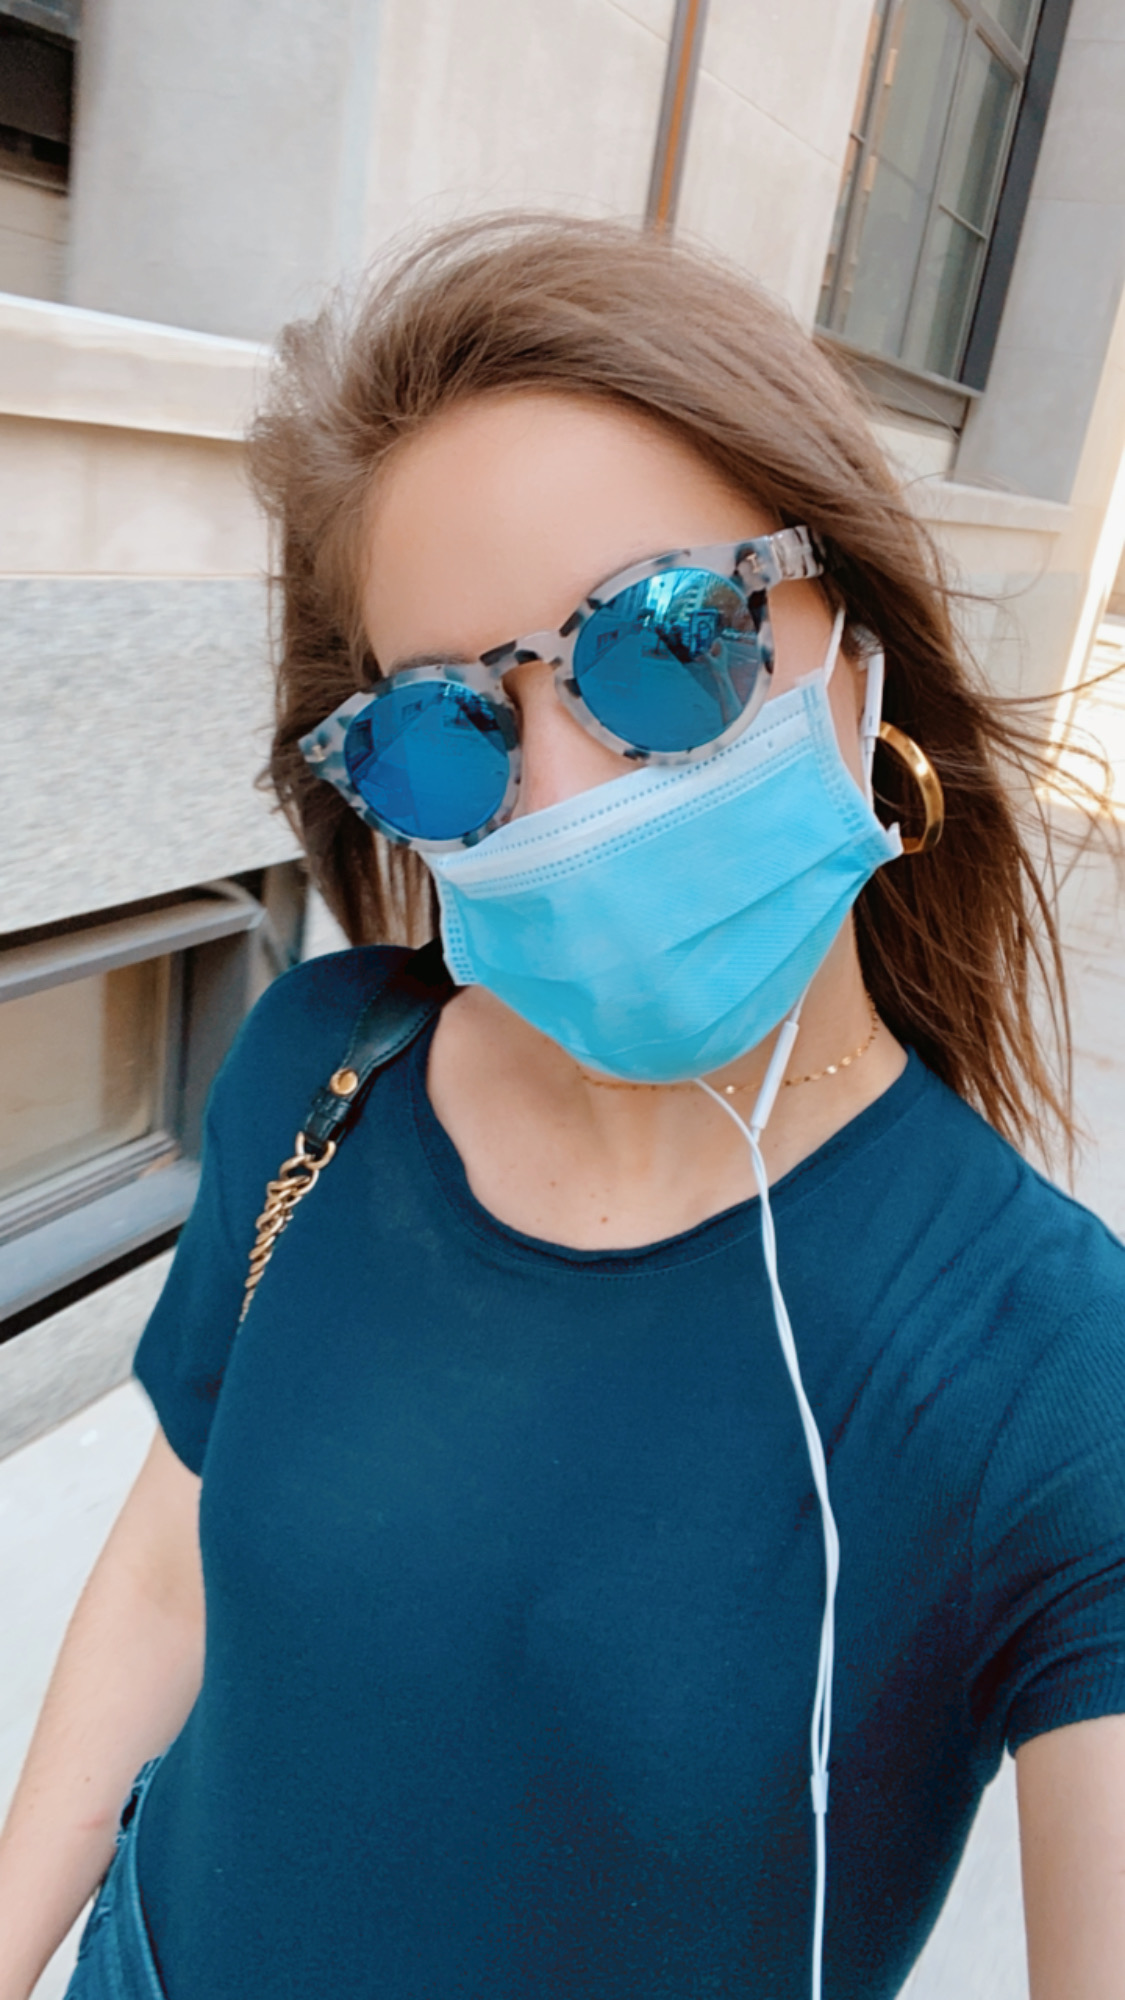 Girl with blue sunglasses, a surgical mask, headphones and a navy t-shirt